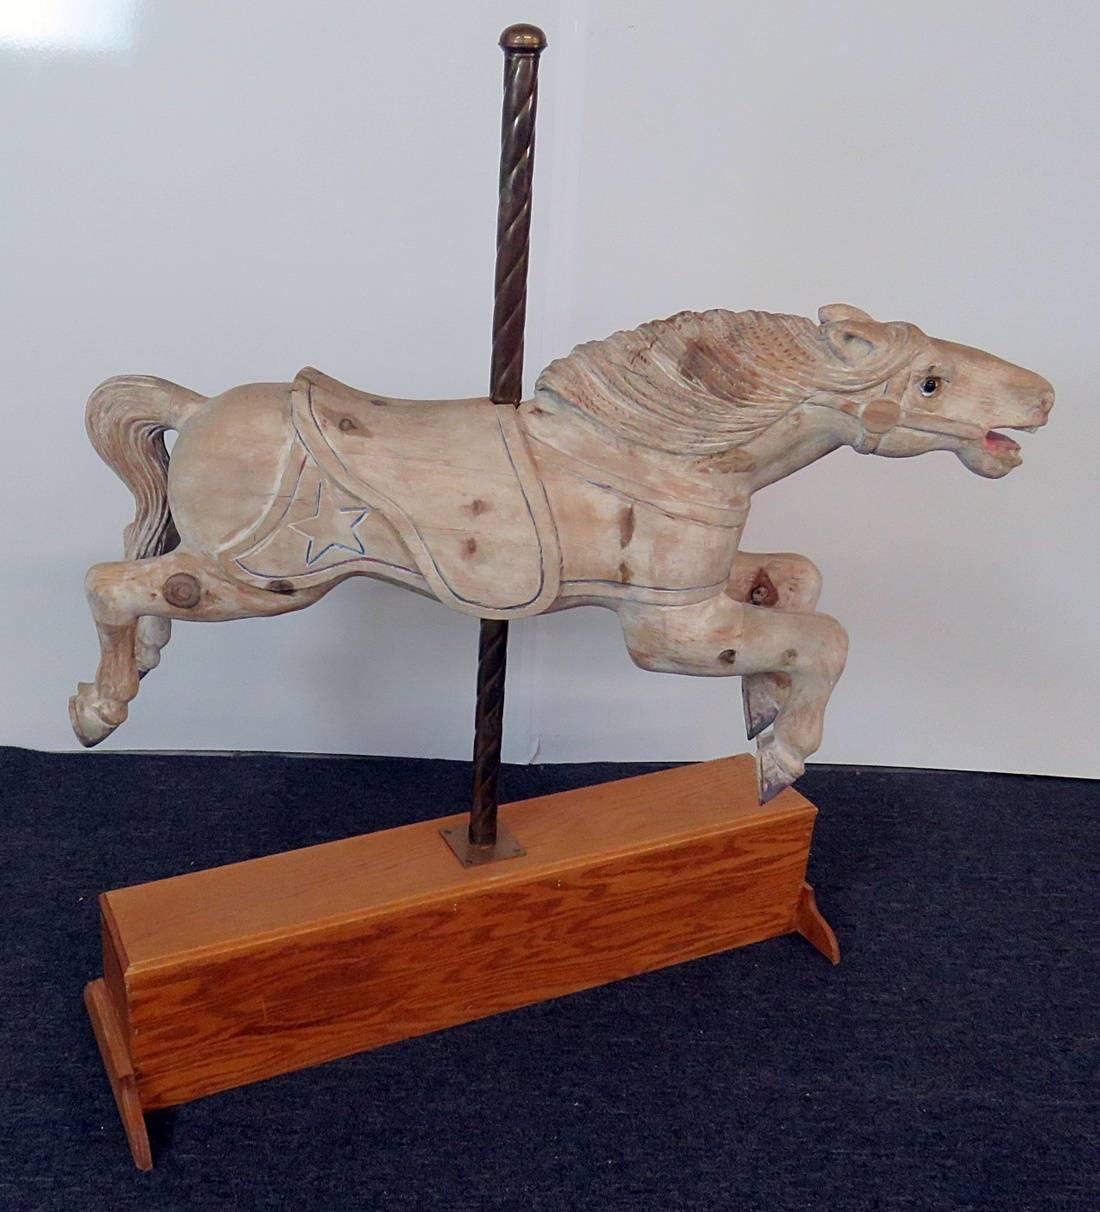 Distressed carousel style carved wood horse with a brass pole on a wood base.